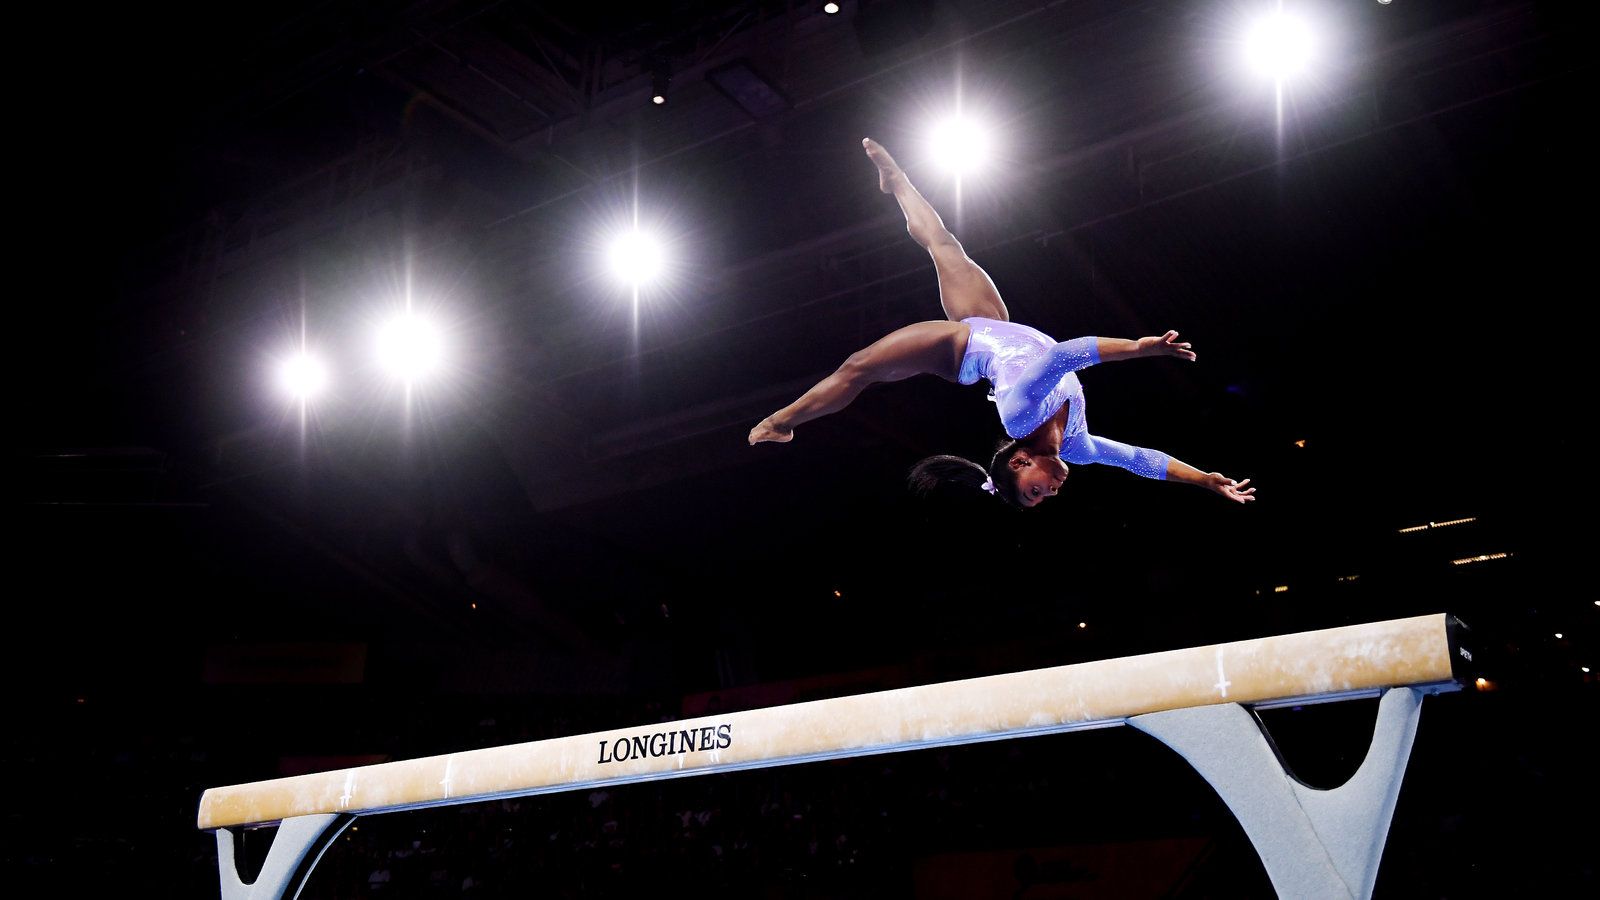 Simone Biles Becomes World Championships' Most Decorated Gymnast